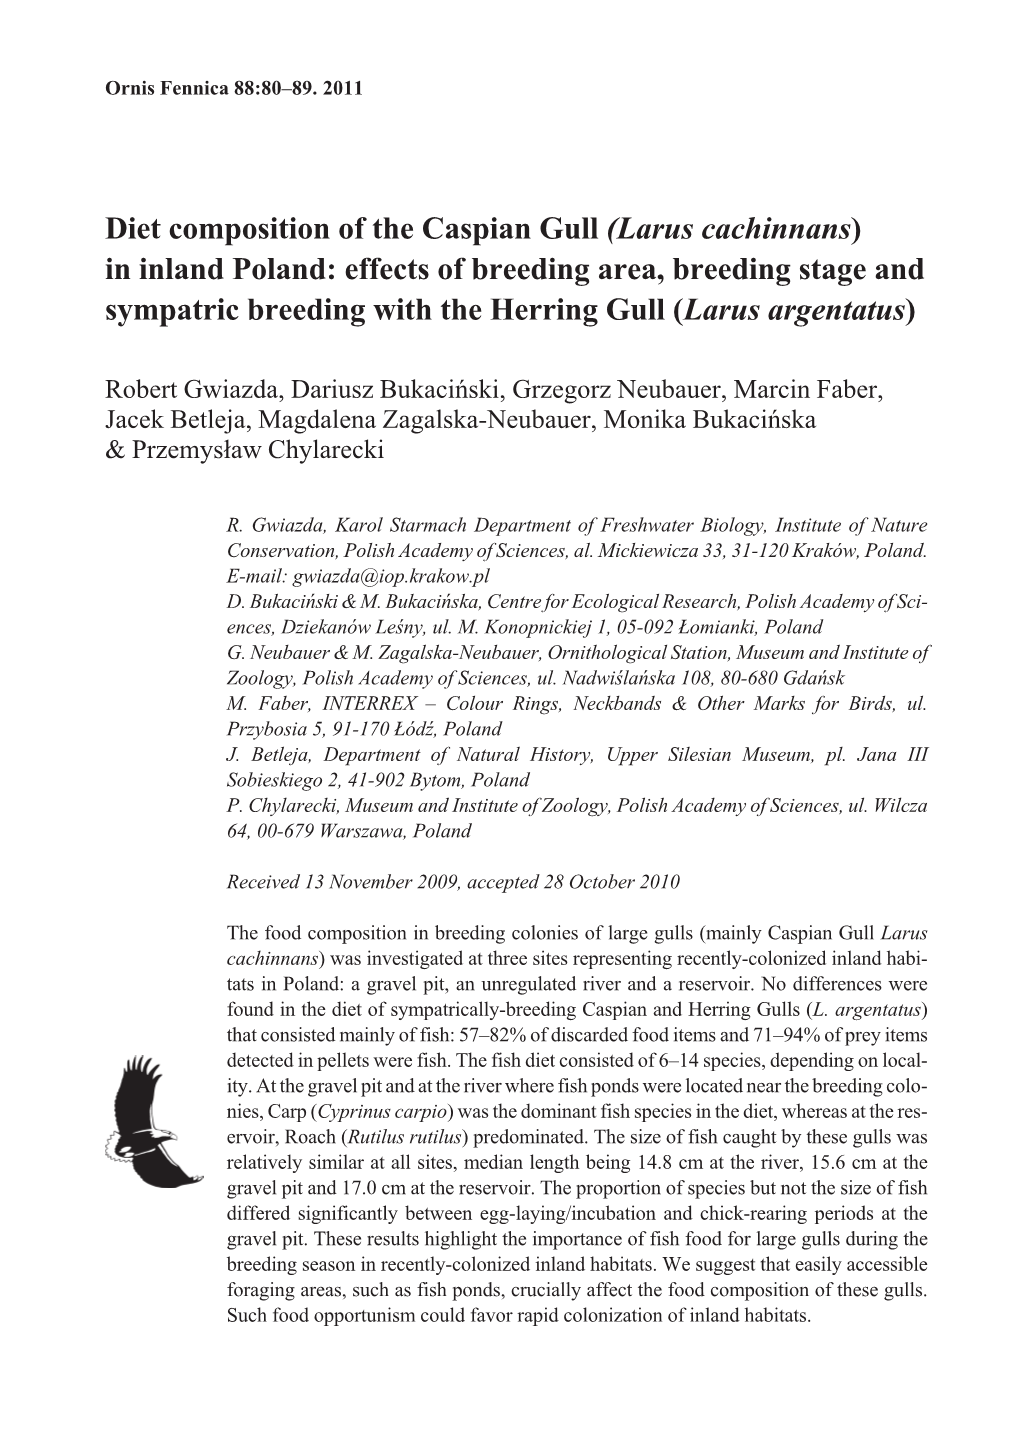 Diet Composition of the Caspian Gull (Larus Cachinnans) in Inland